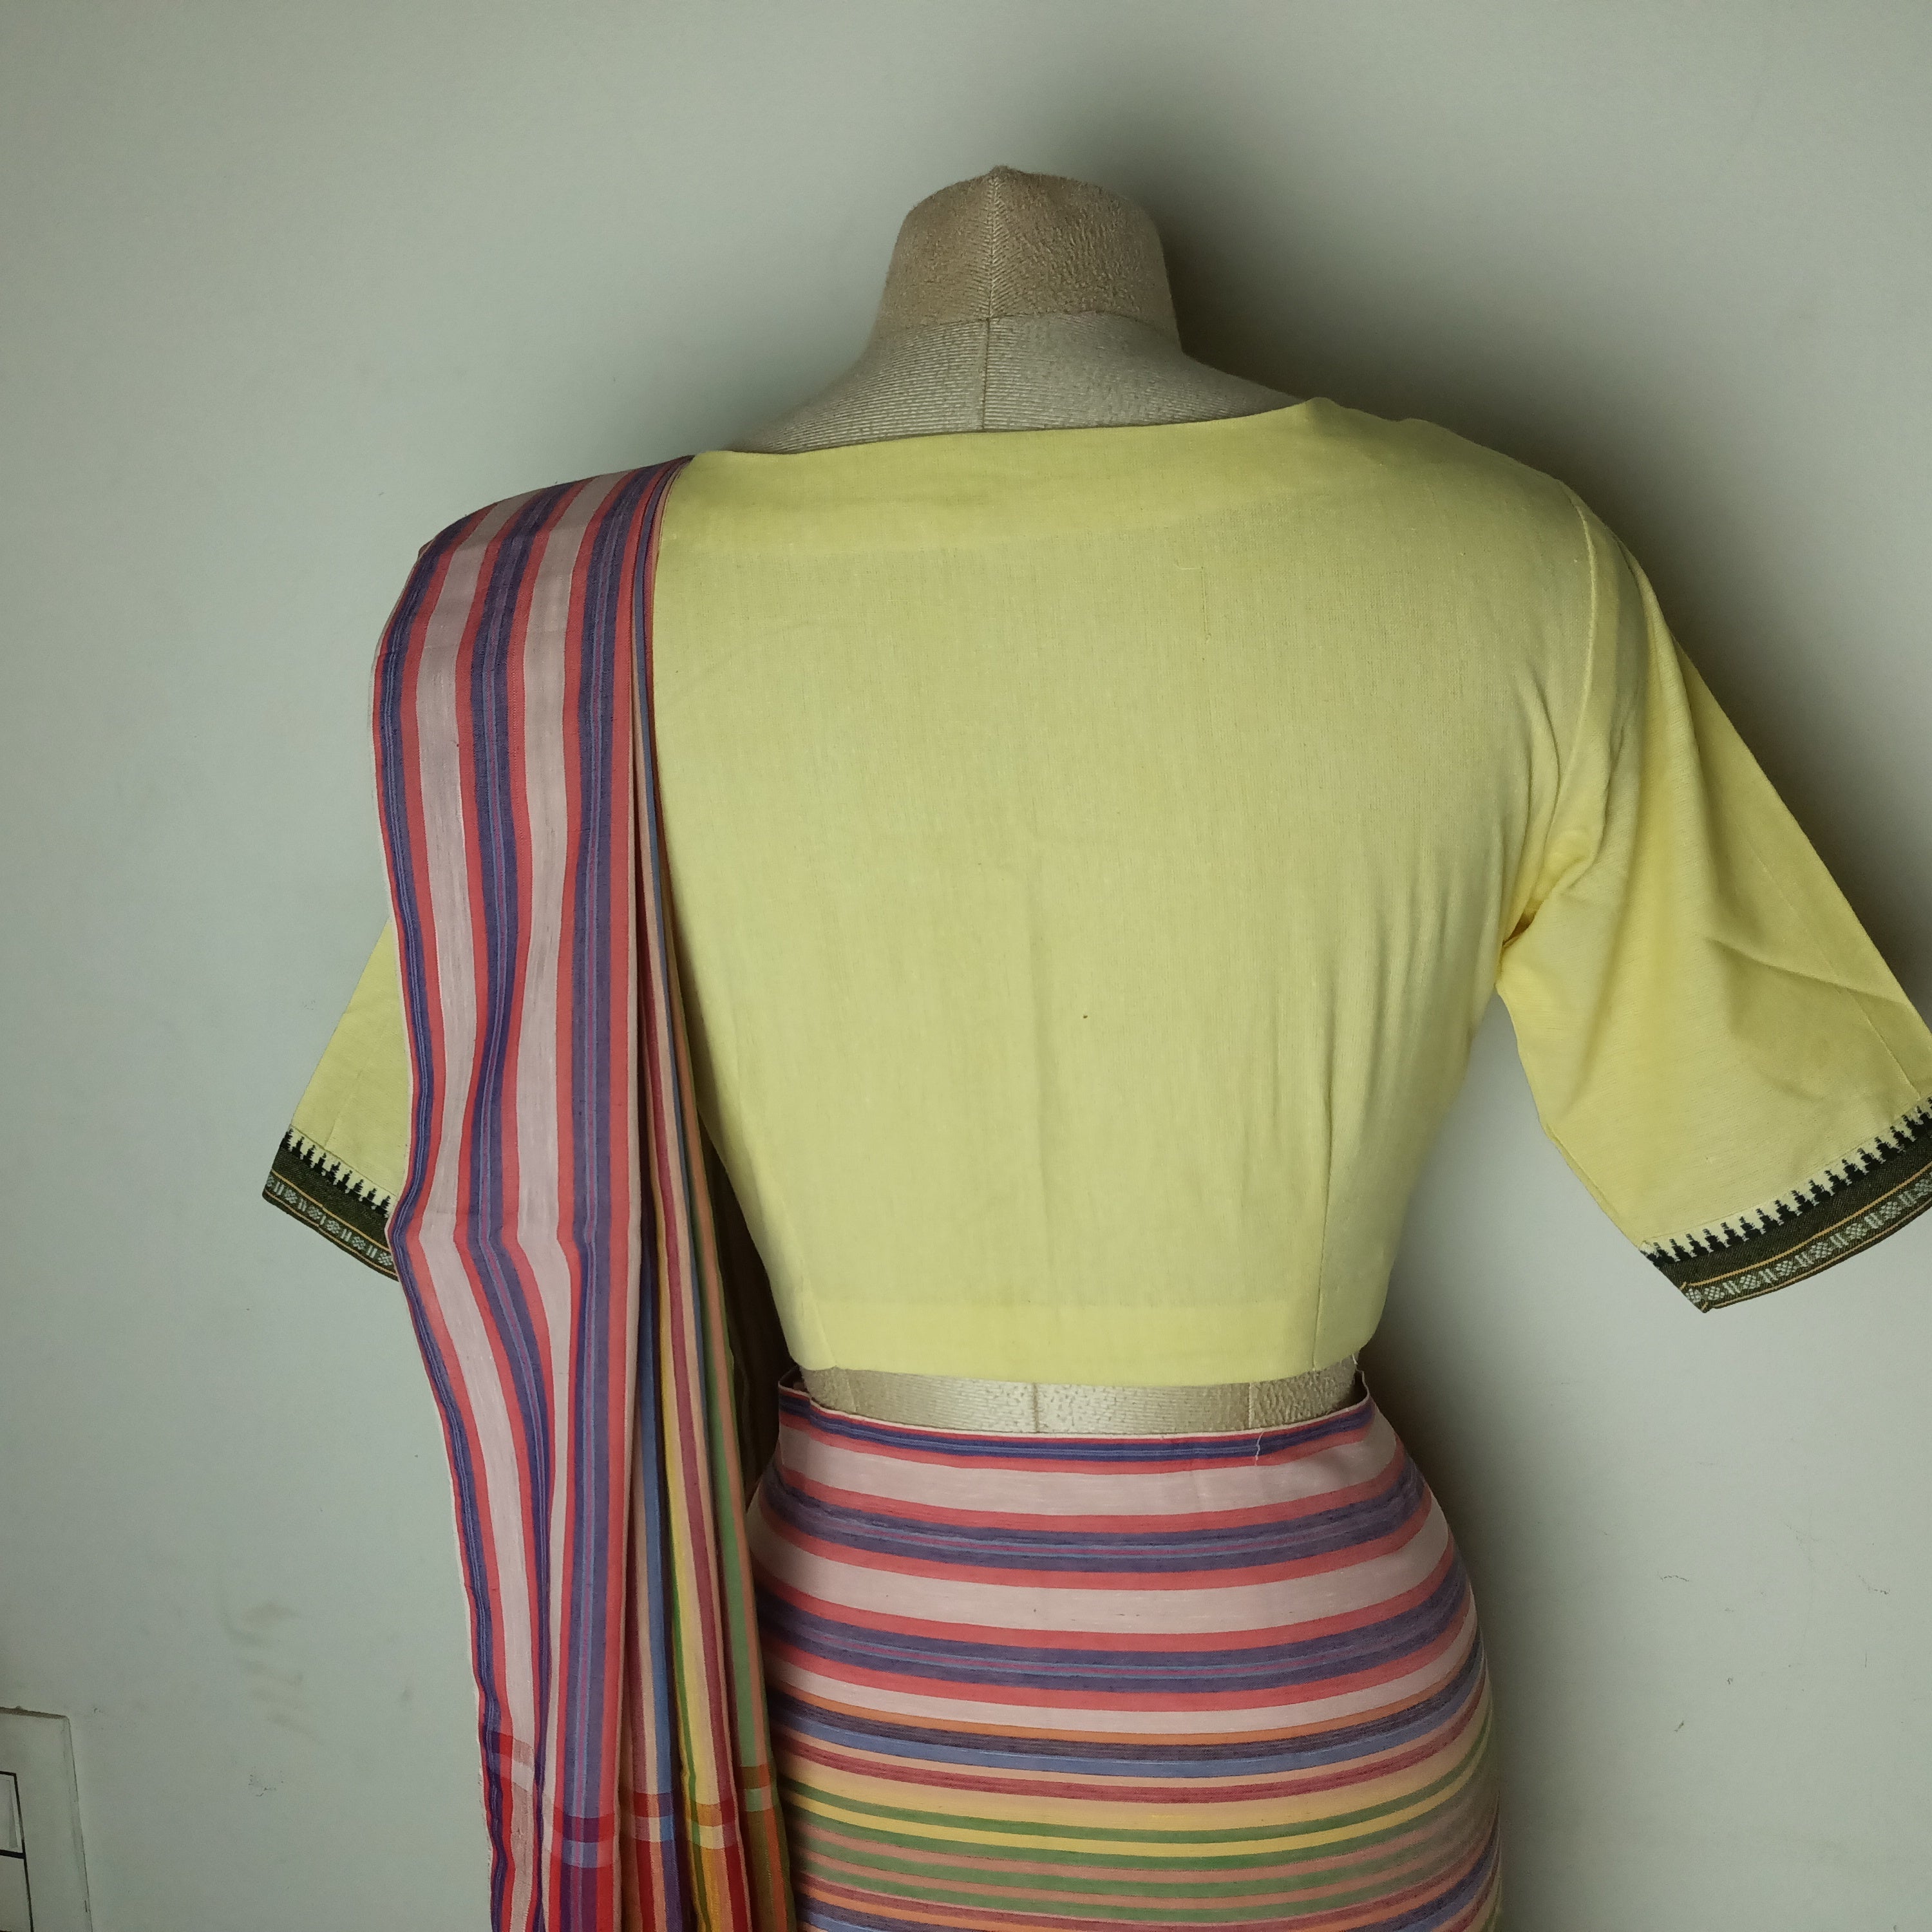 Multicoloured stripes saree with plain yellow TEB blouse from Umbara designs